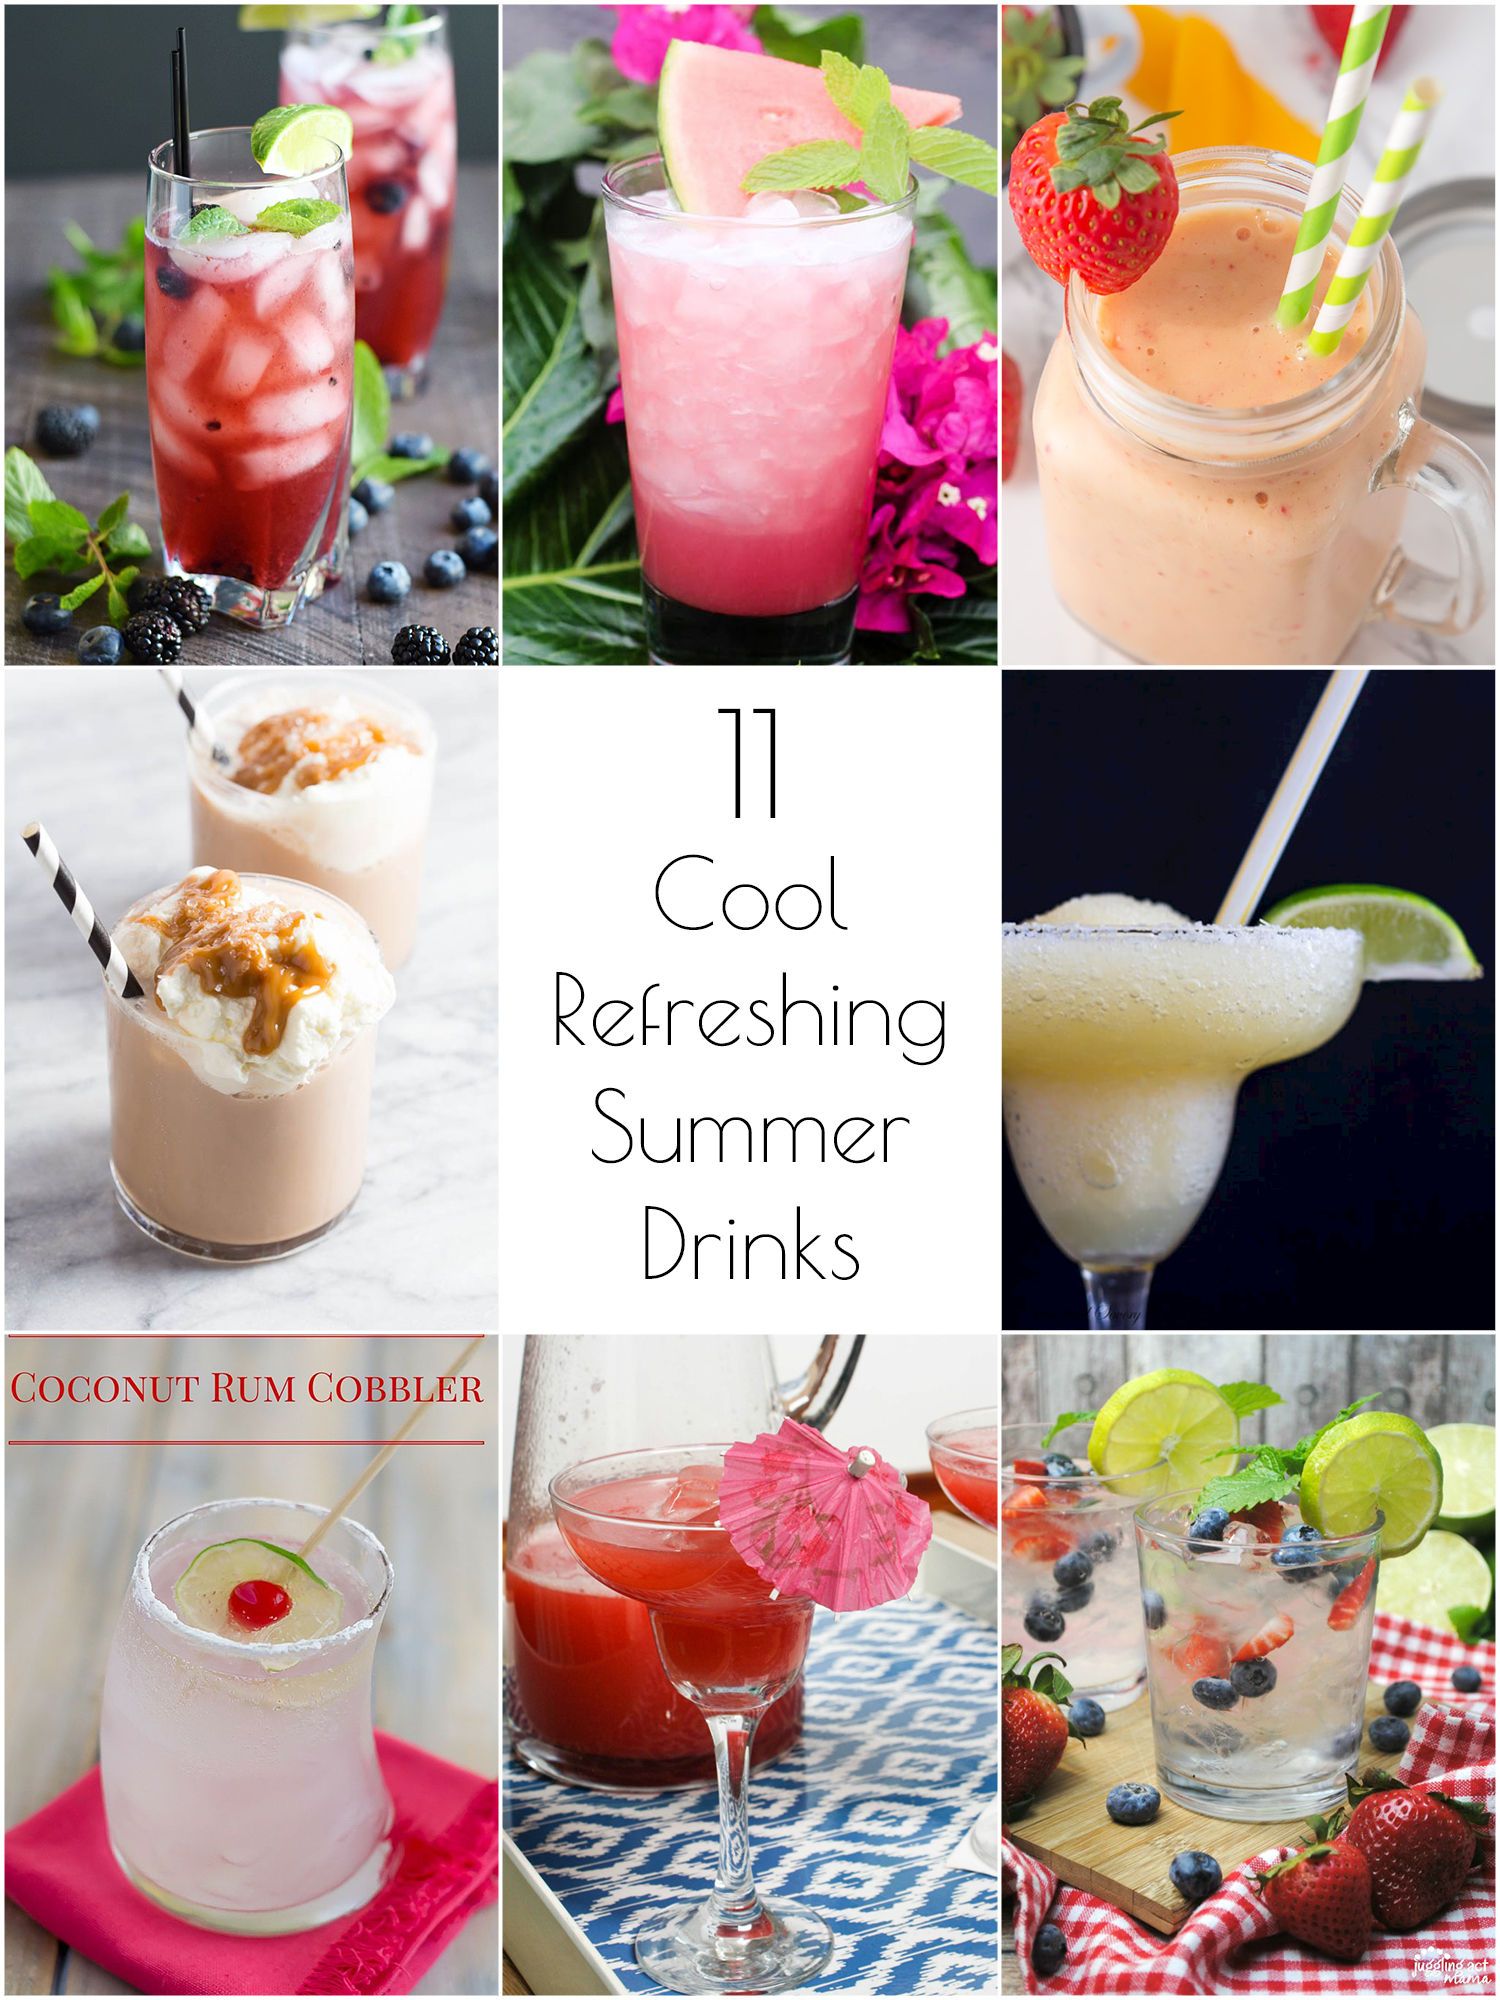 So Creative! - 11 Cool, Refreshing Summer Drink Recipes